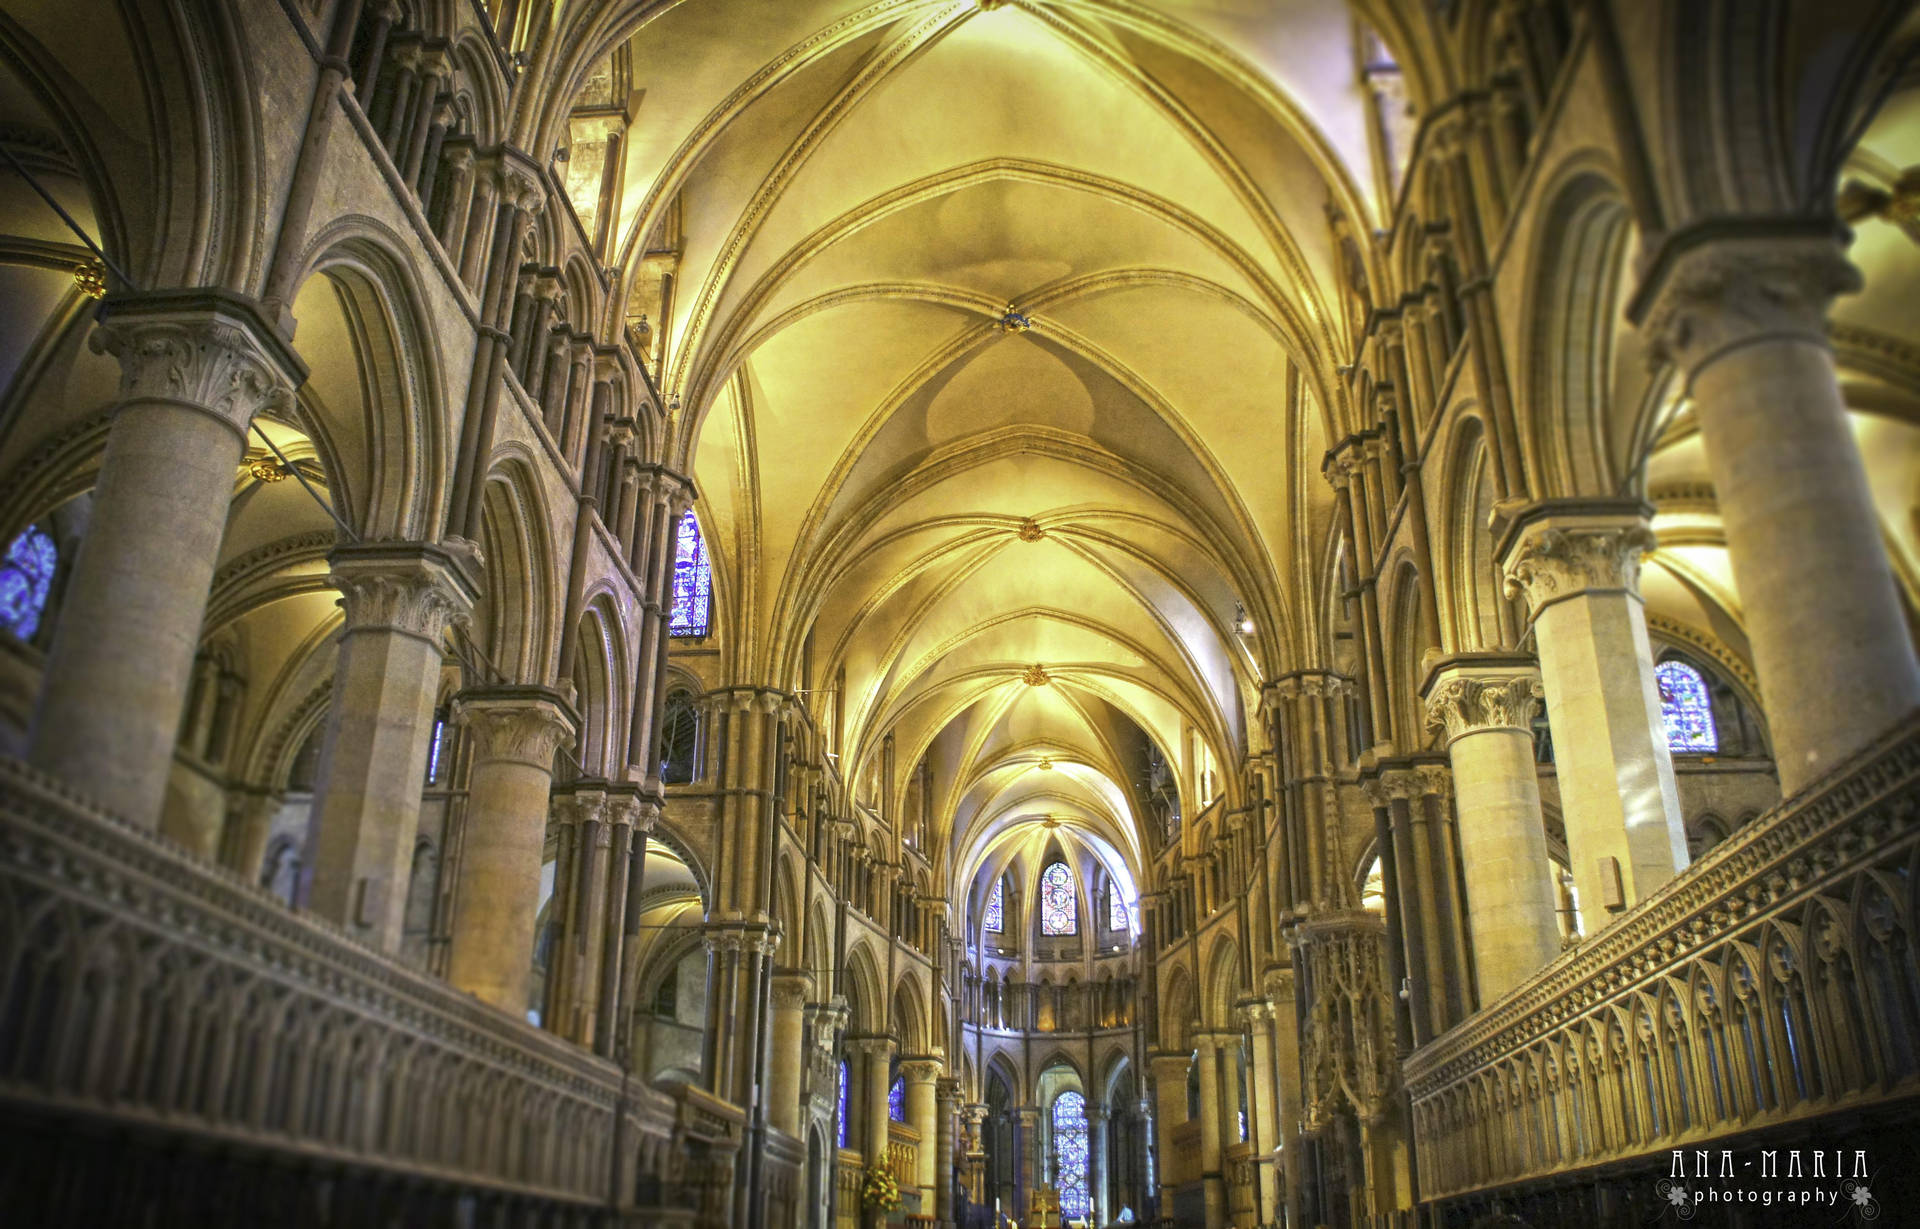 Captivating 4K Architecture of a Cathedral Interior Wallpaper